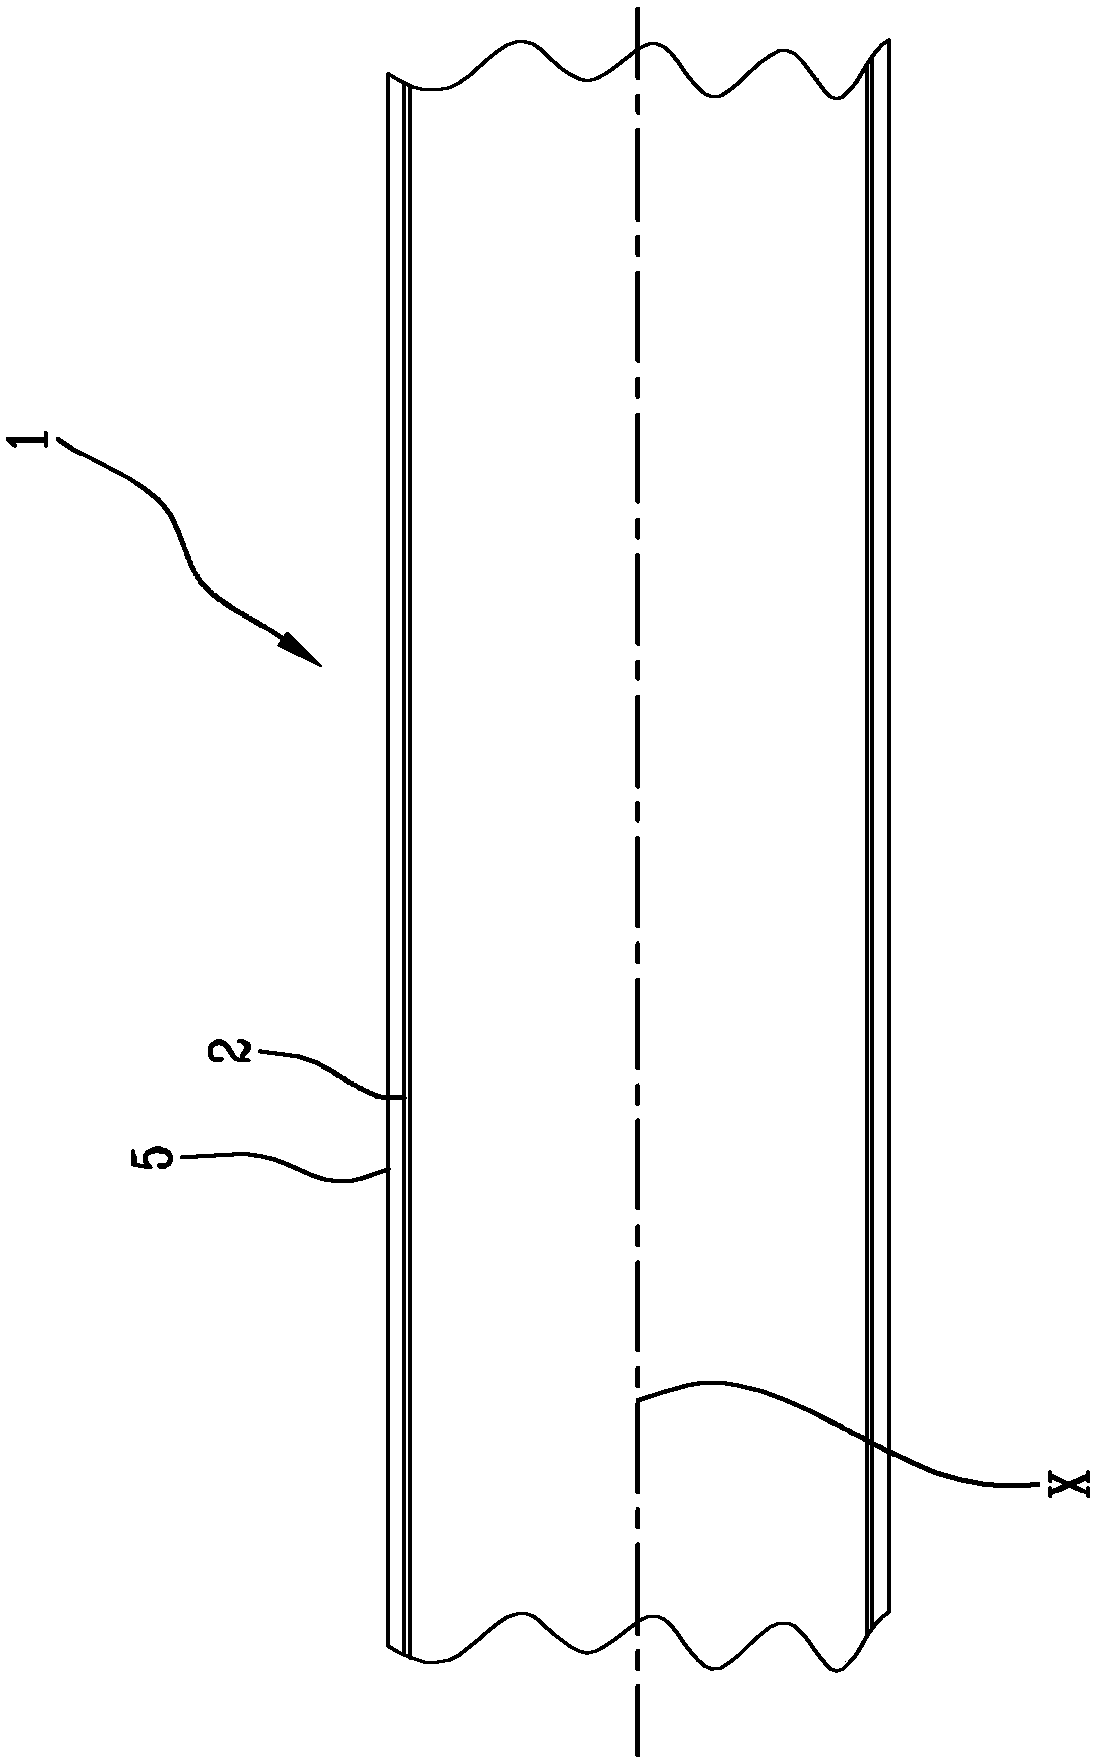 Method and machine for making pieces of a multilayer, cylindrical tubular rod used to make substantially cylindrical smokers' articles, and the pieces made by the method and machine